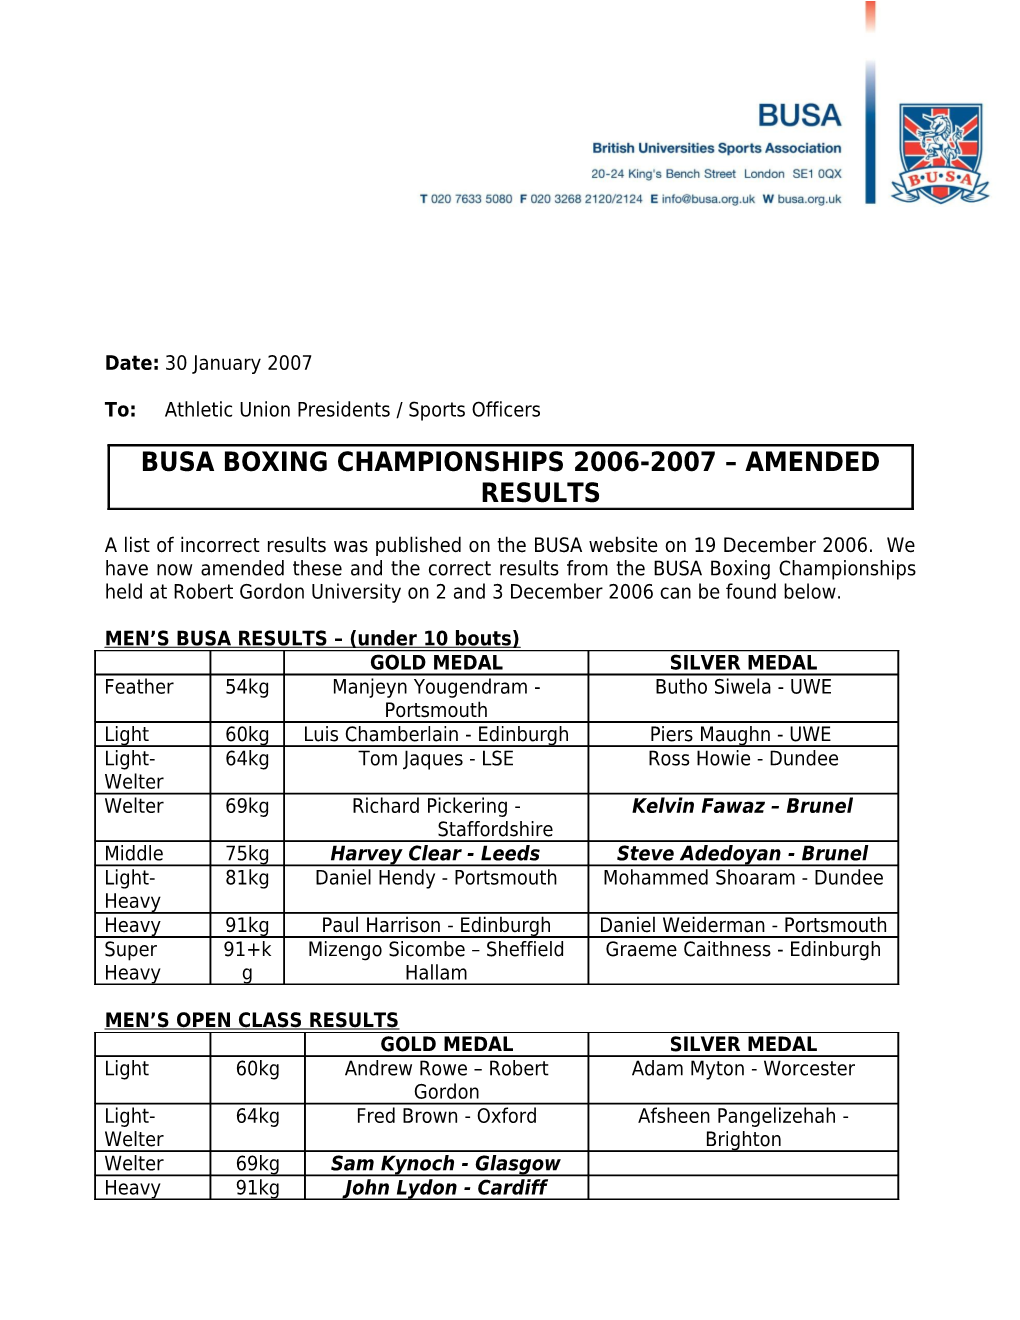 Busa Boxing Championships 2006-2007 Amended Results